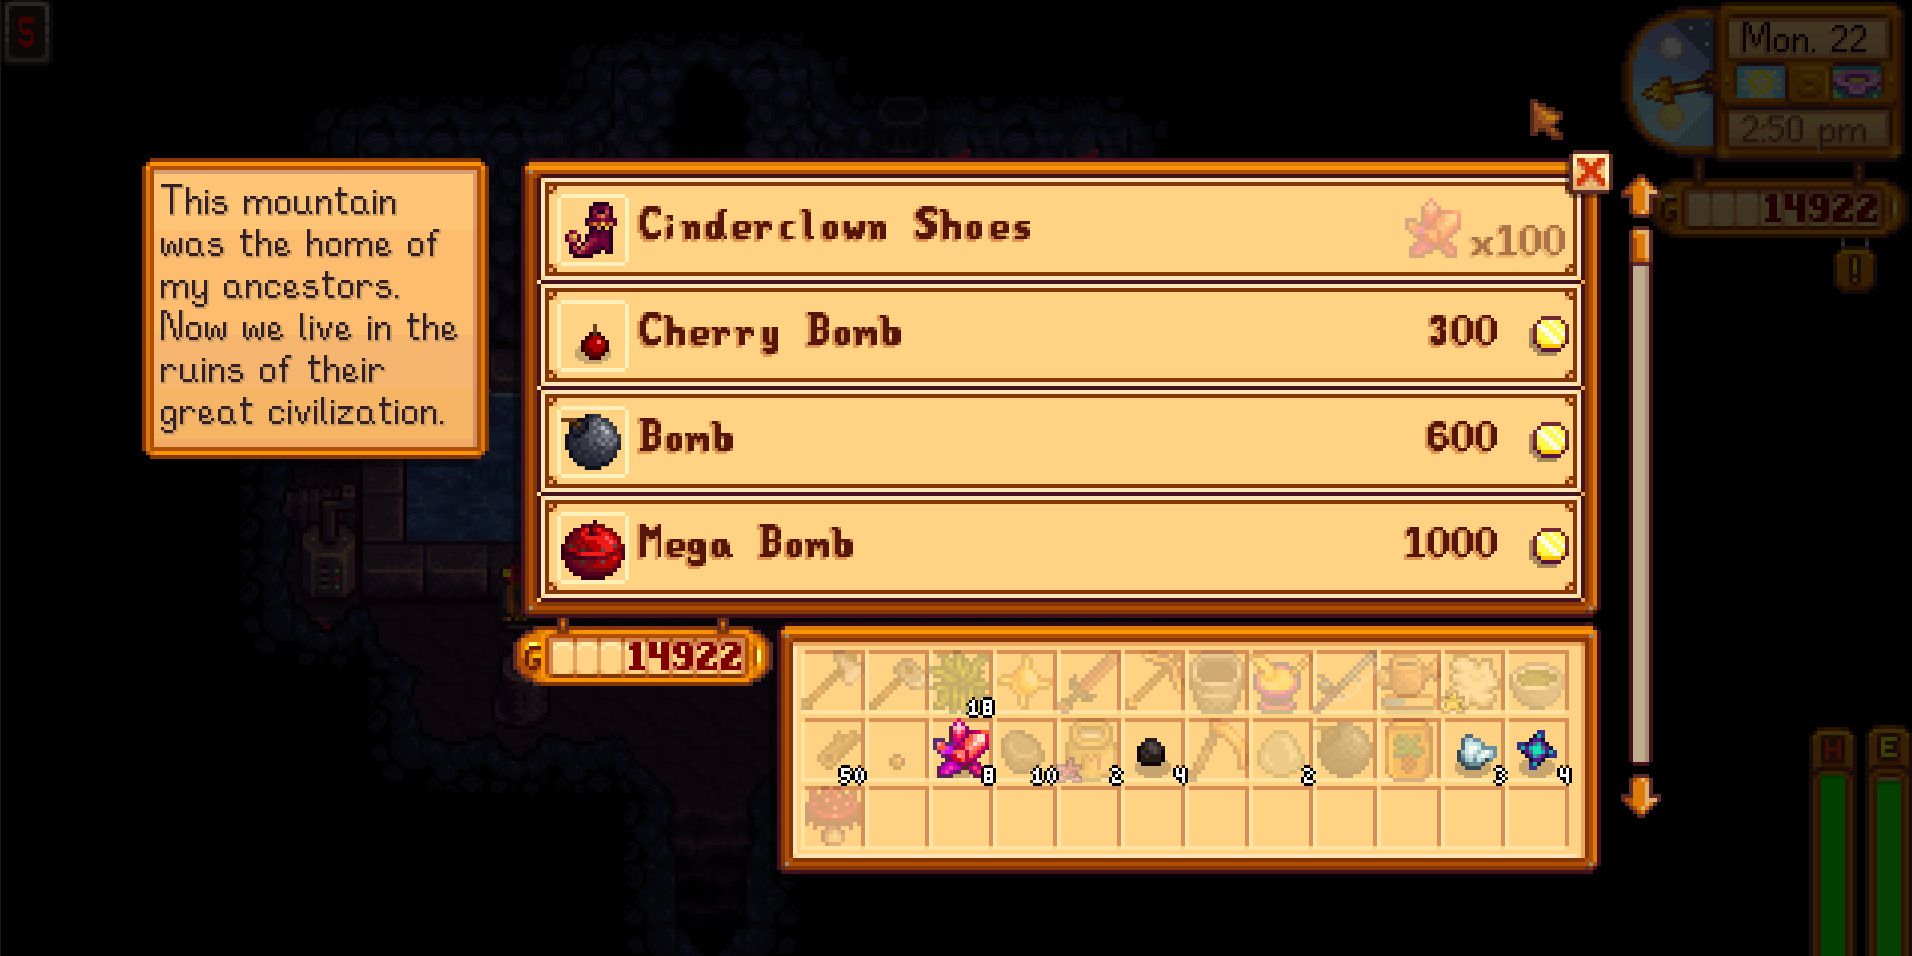 Image of some of the items available for purchase at the Volcano Shop in Stardew Valley